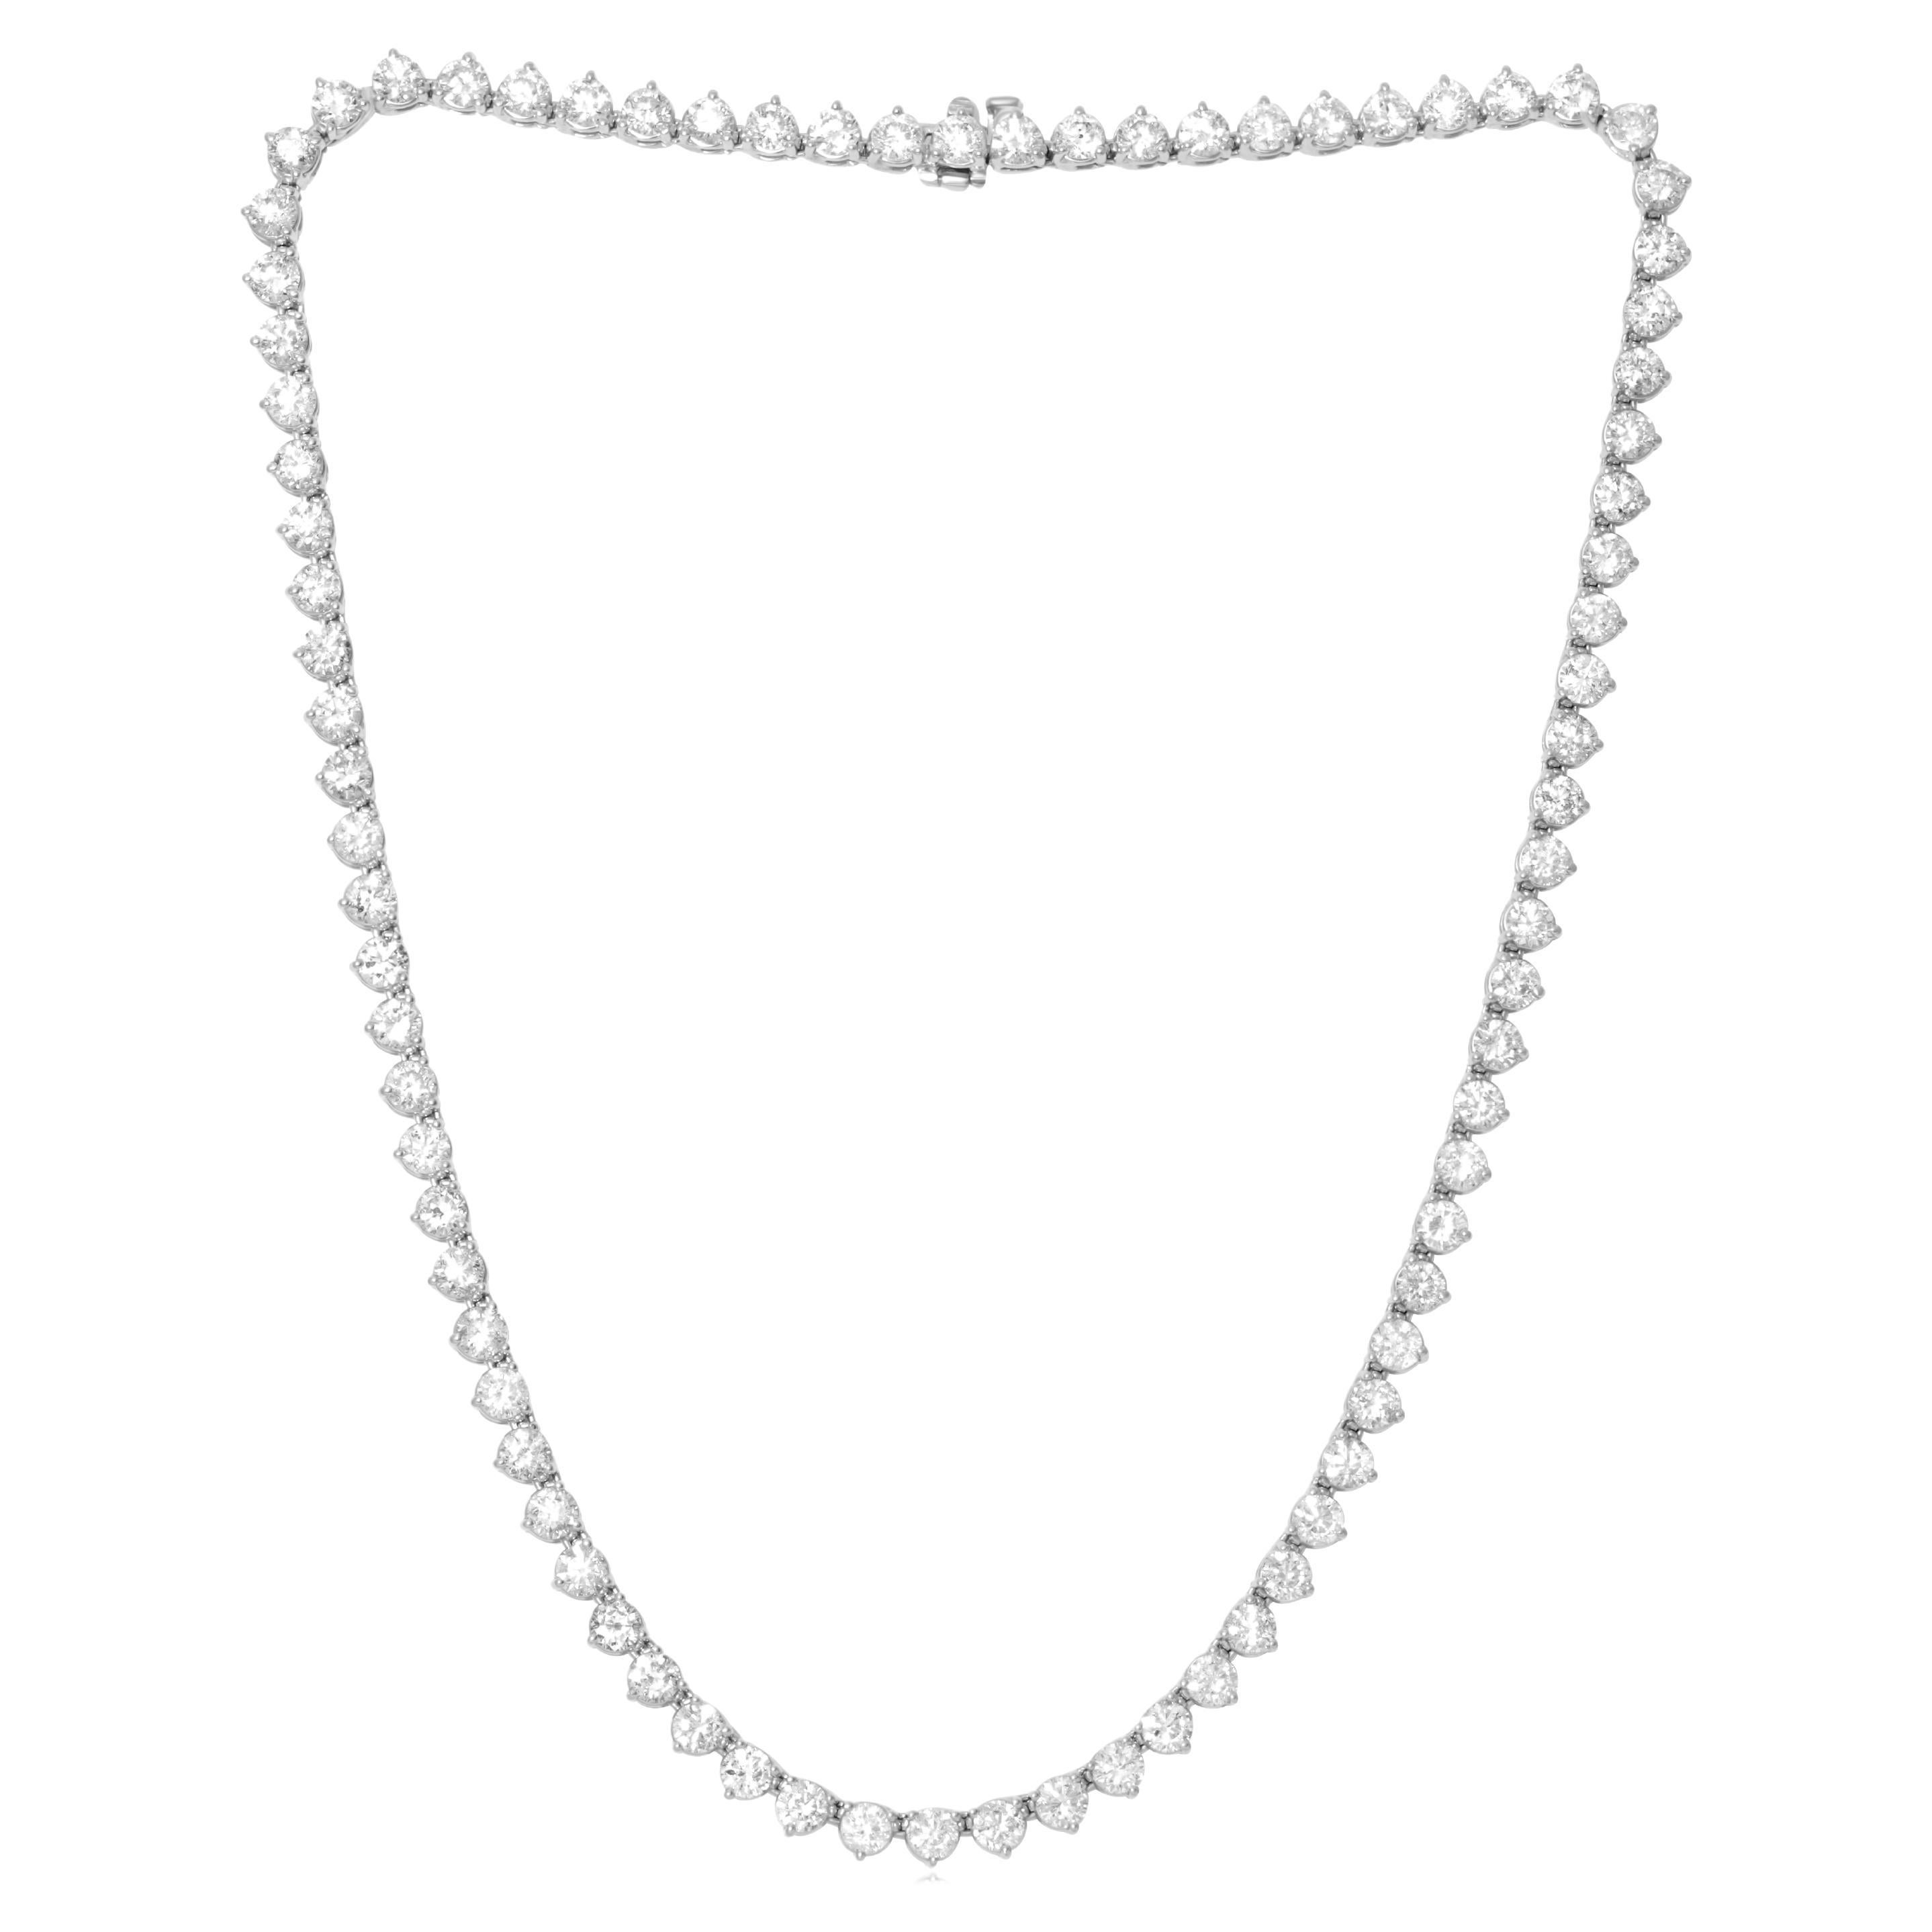 Diana M. Custom 10.00 cts 3 prong diamond 18k white gold tennis necklace 16.5" For Sale